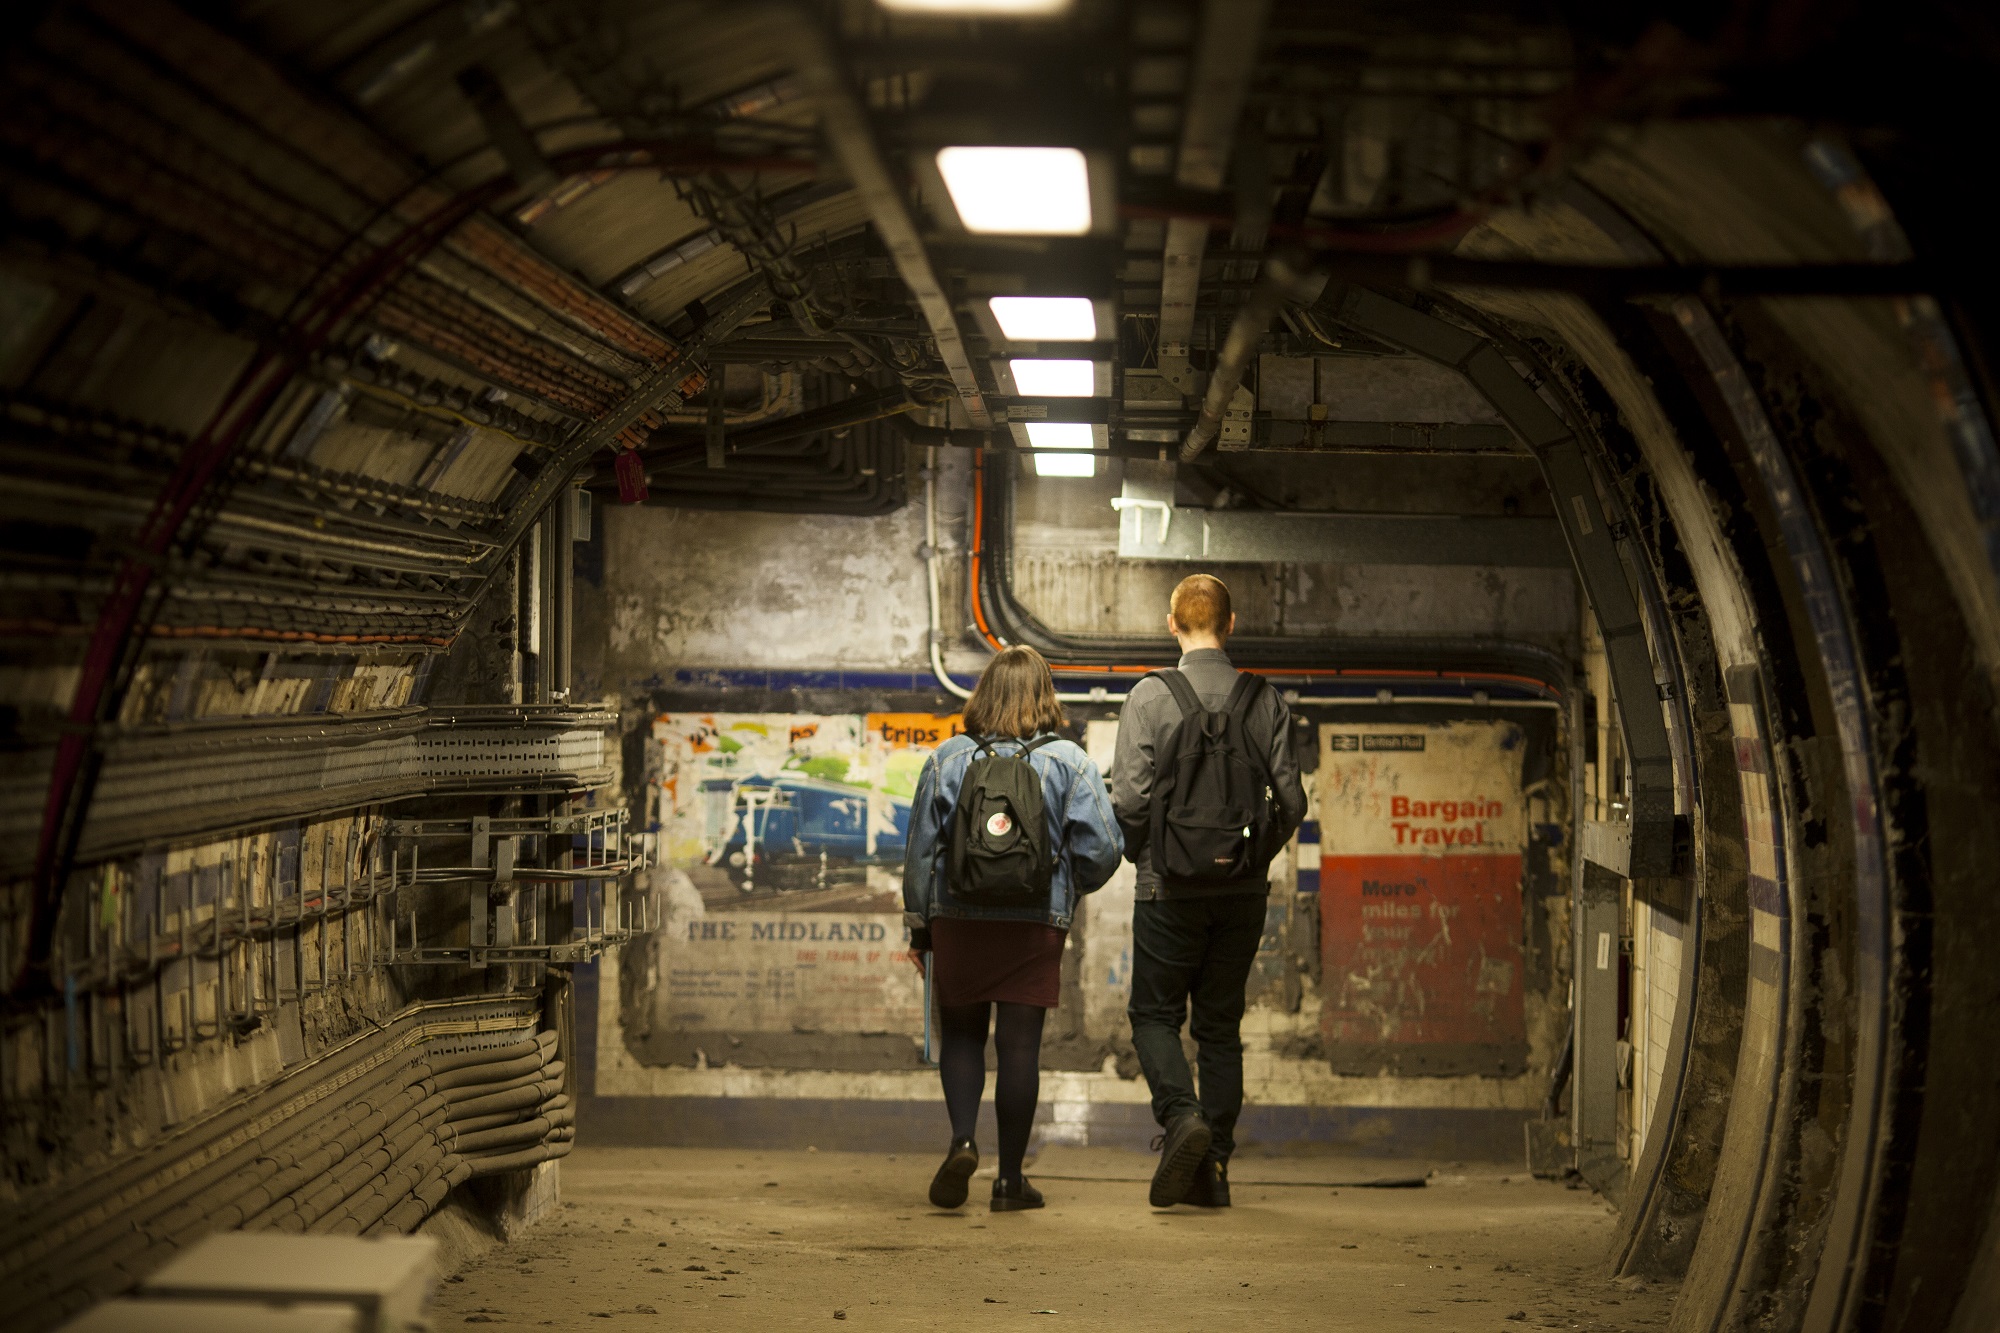 tour old london underground stations